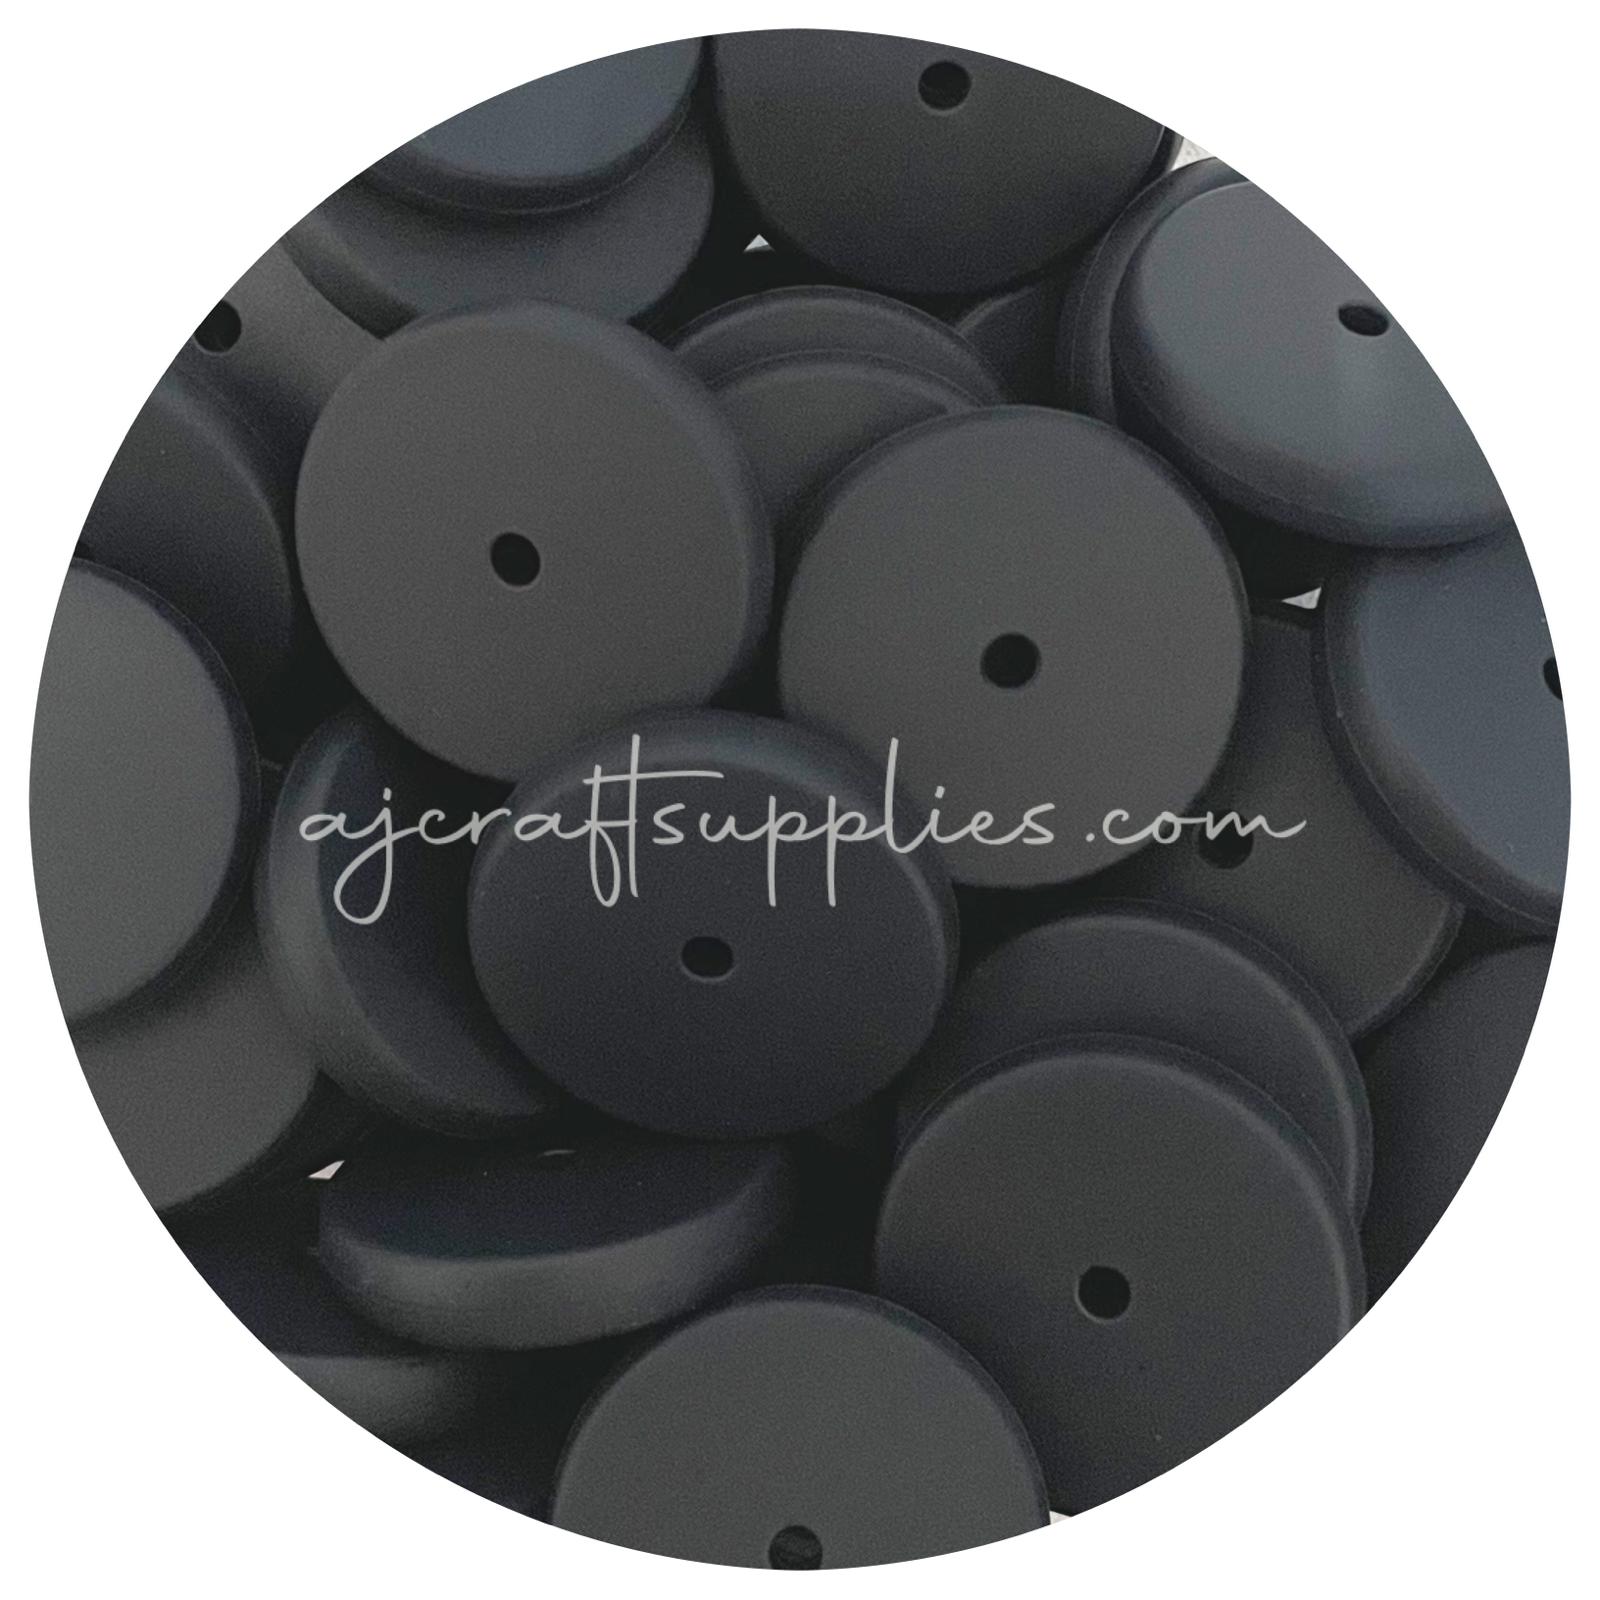 Jet Black - 25mm Flat Coin Silicone Beads - 5 beads